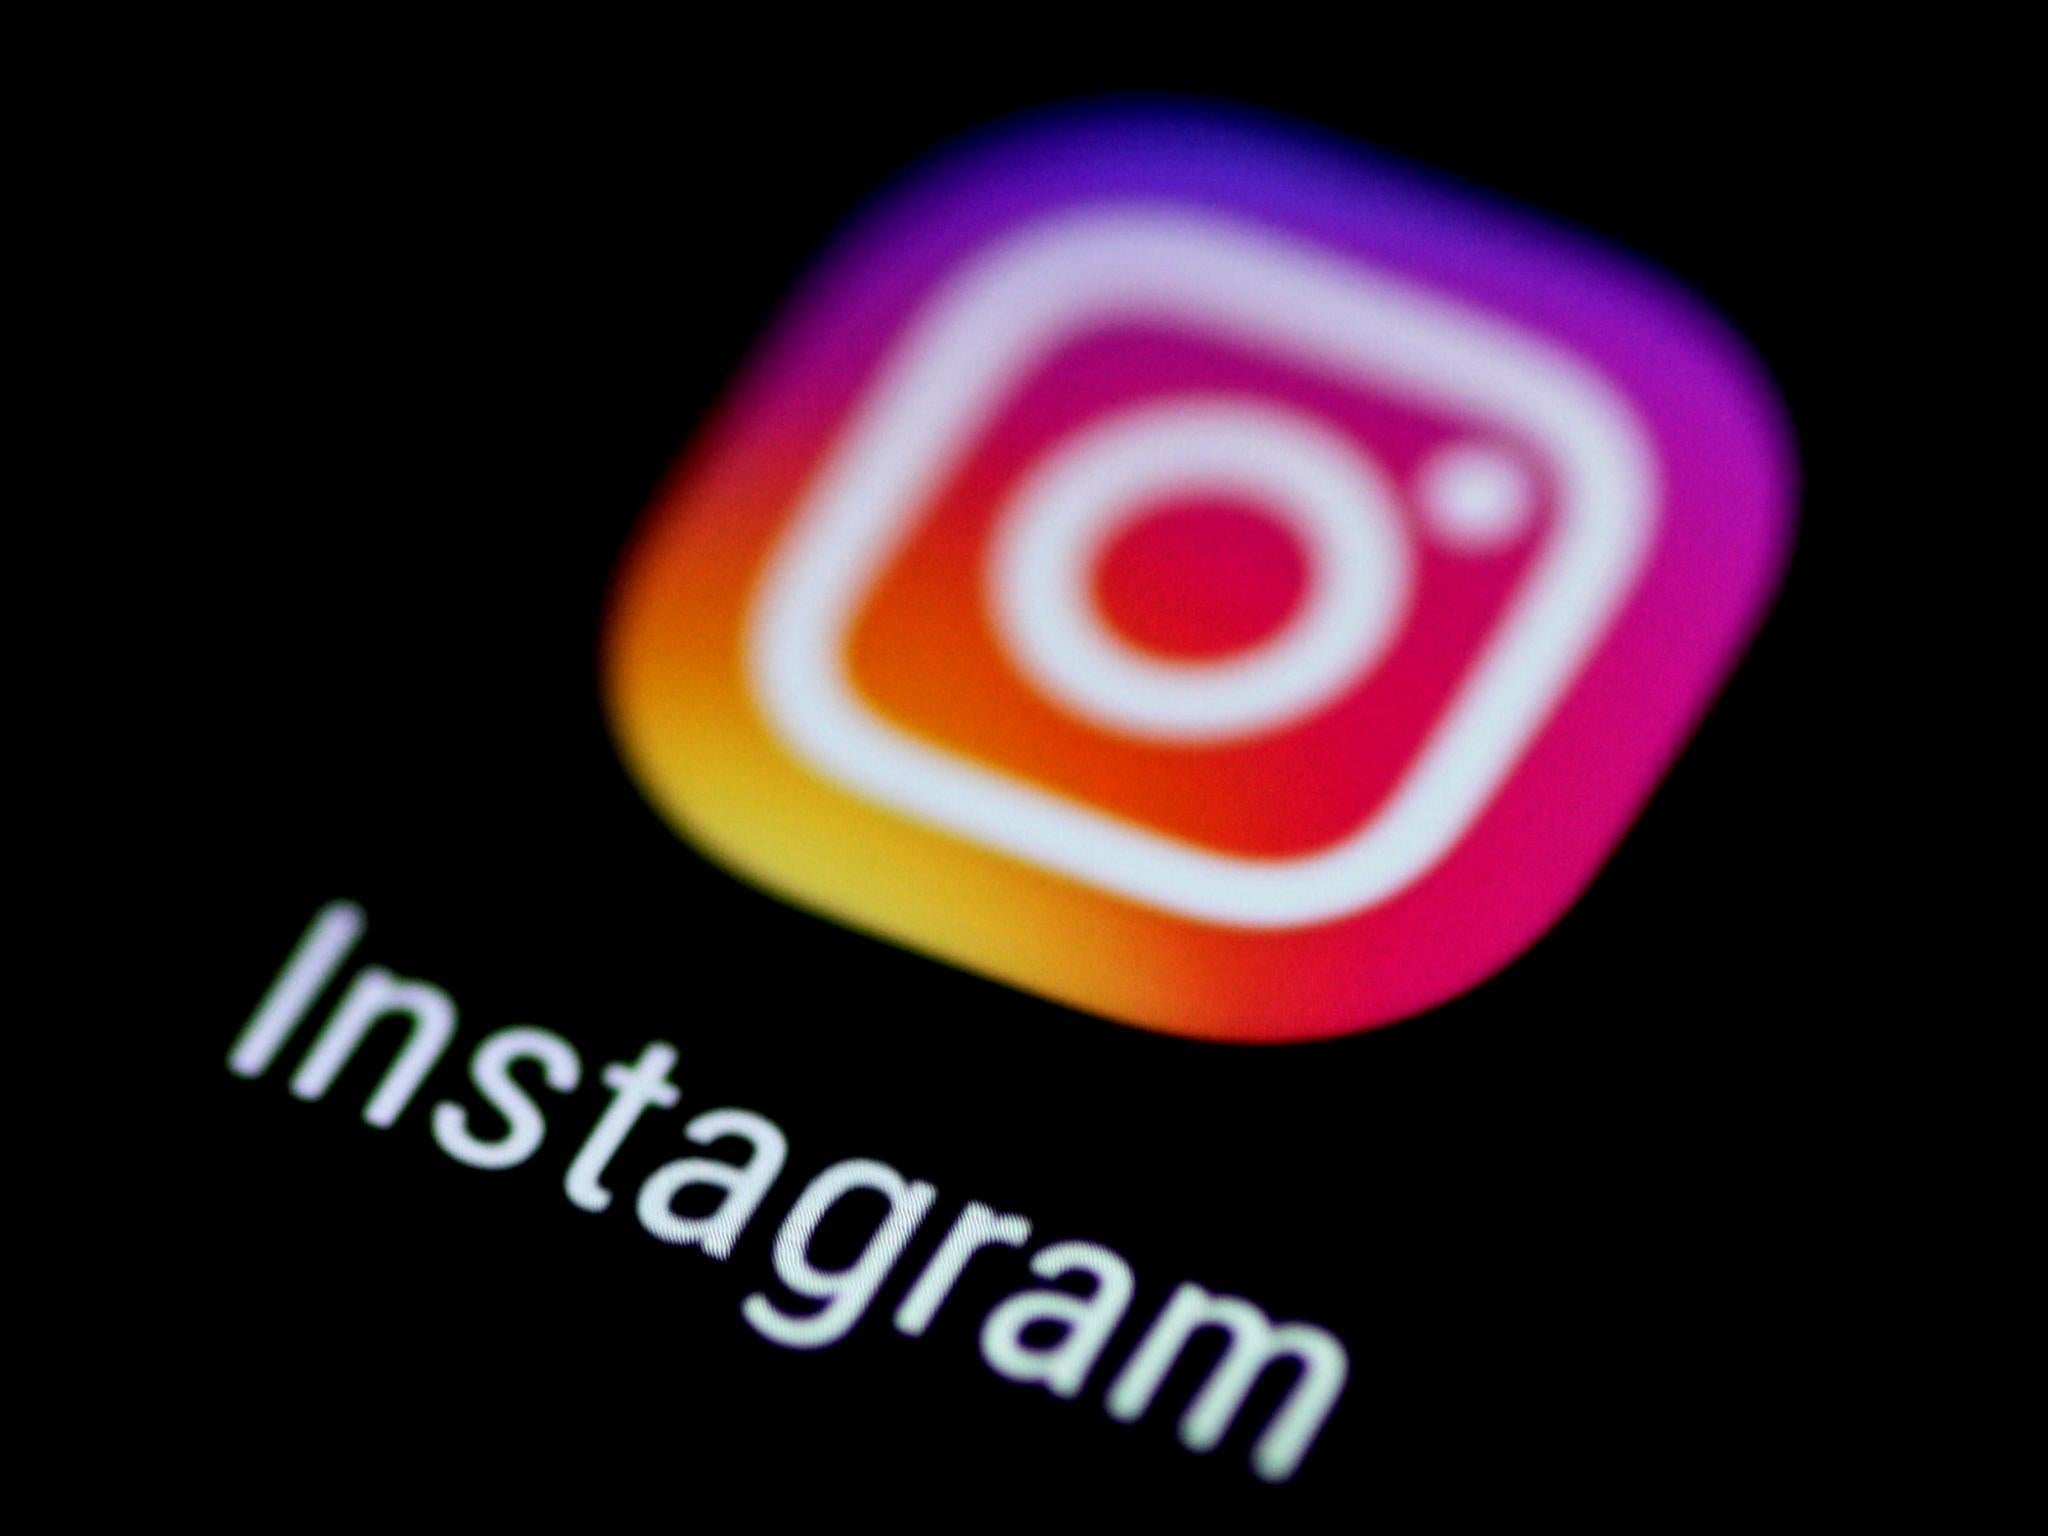 The Instagram application is seen on a phone screen August 3, 2017